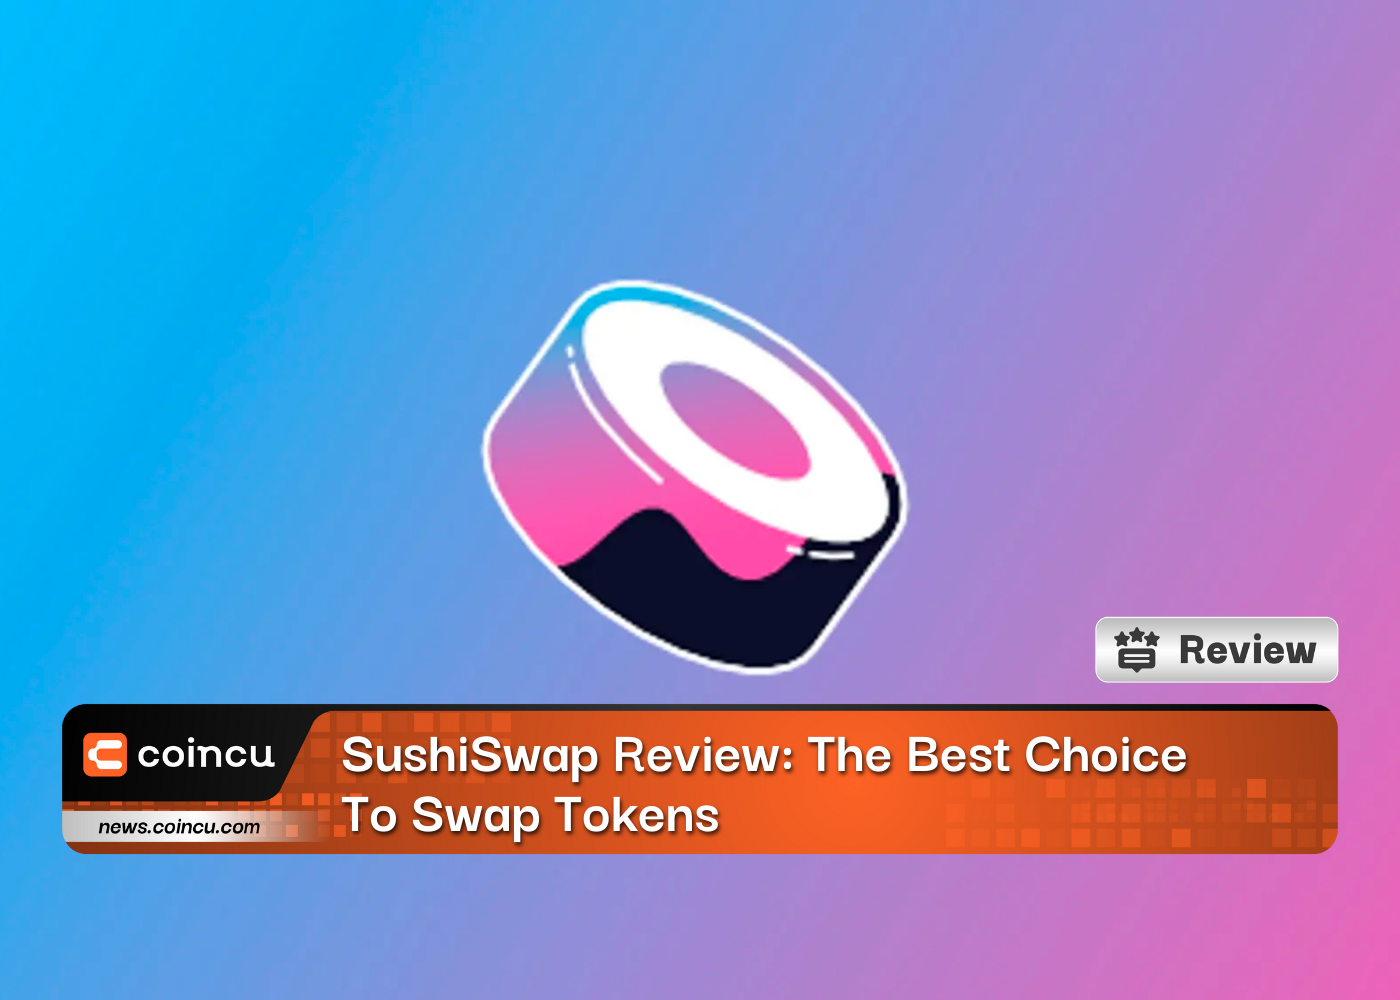 SushiSwap Review: The Best Choice To Swap Tokens